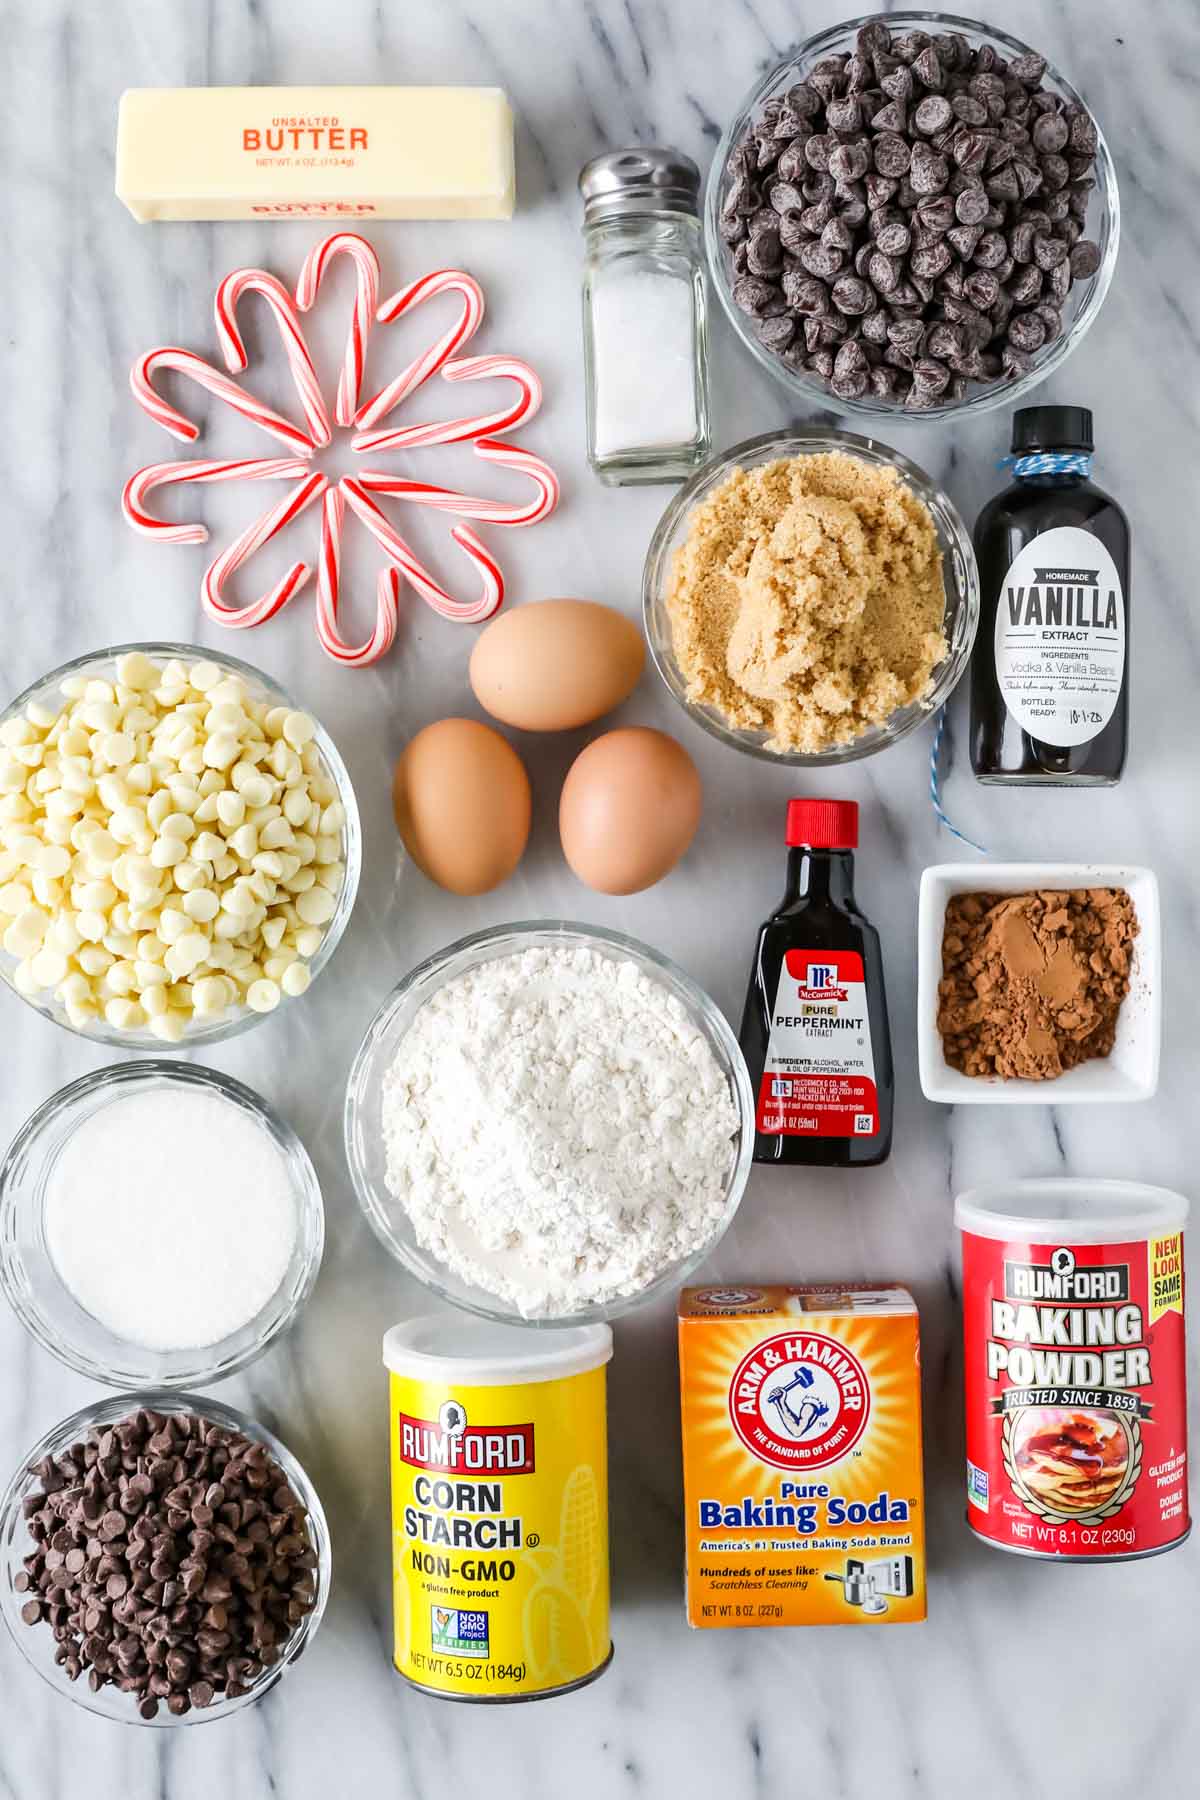 Overhead view of ingredients including candy canes, white chocolate chips, cocoa powder, and more.